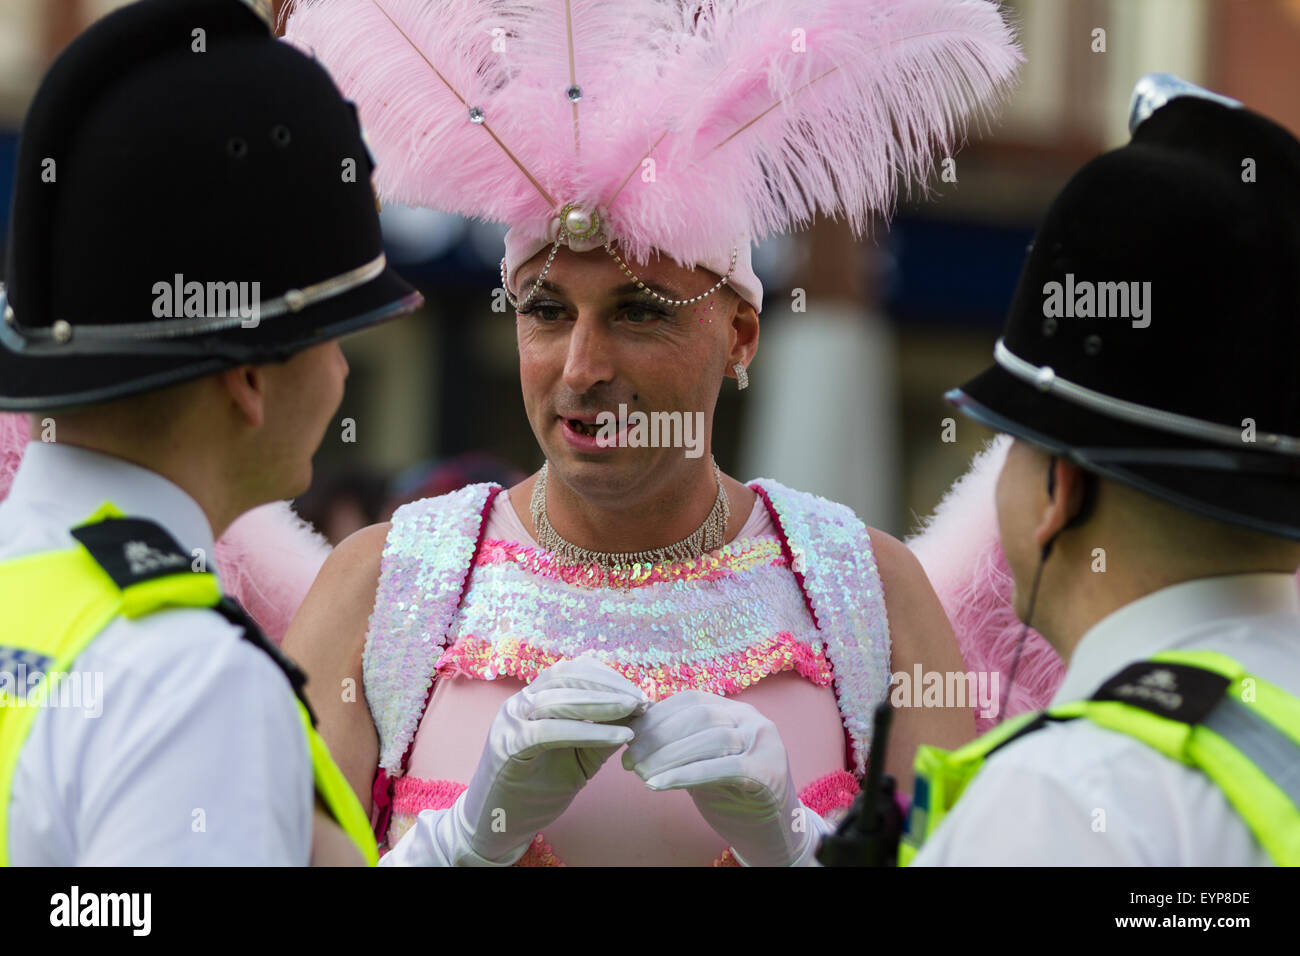 Stockton-on-Tees, UK, Saturday, 1st August, 2015. A male street performer, in full costume as a pink angel, interacts with two officers from Cleveland Police, dressed in their normal police uniform, at Instant Light, the 28th Stockton International Riverside Festival. Credit:  Andrew Nicholson/Alamy Live News Stock Photo